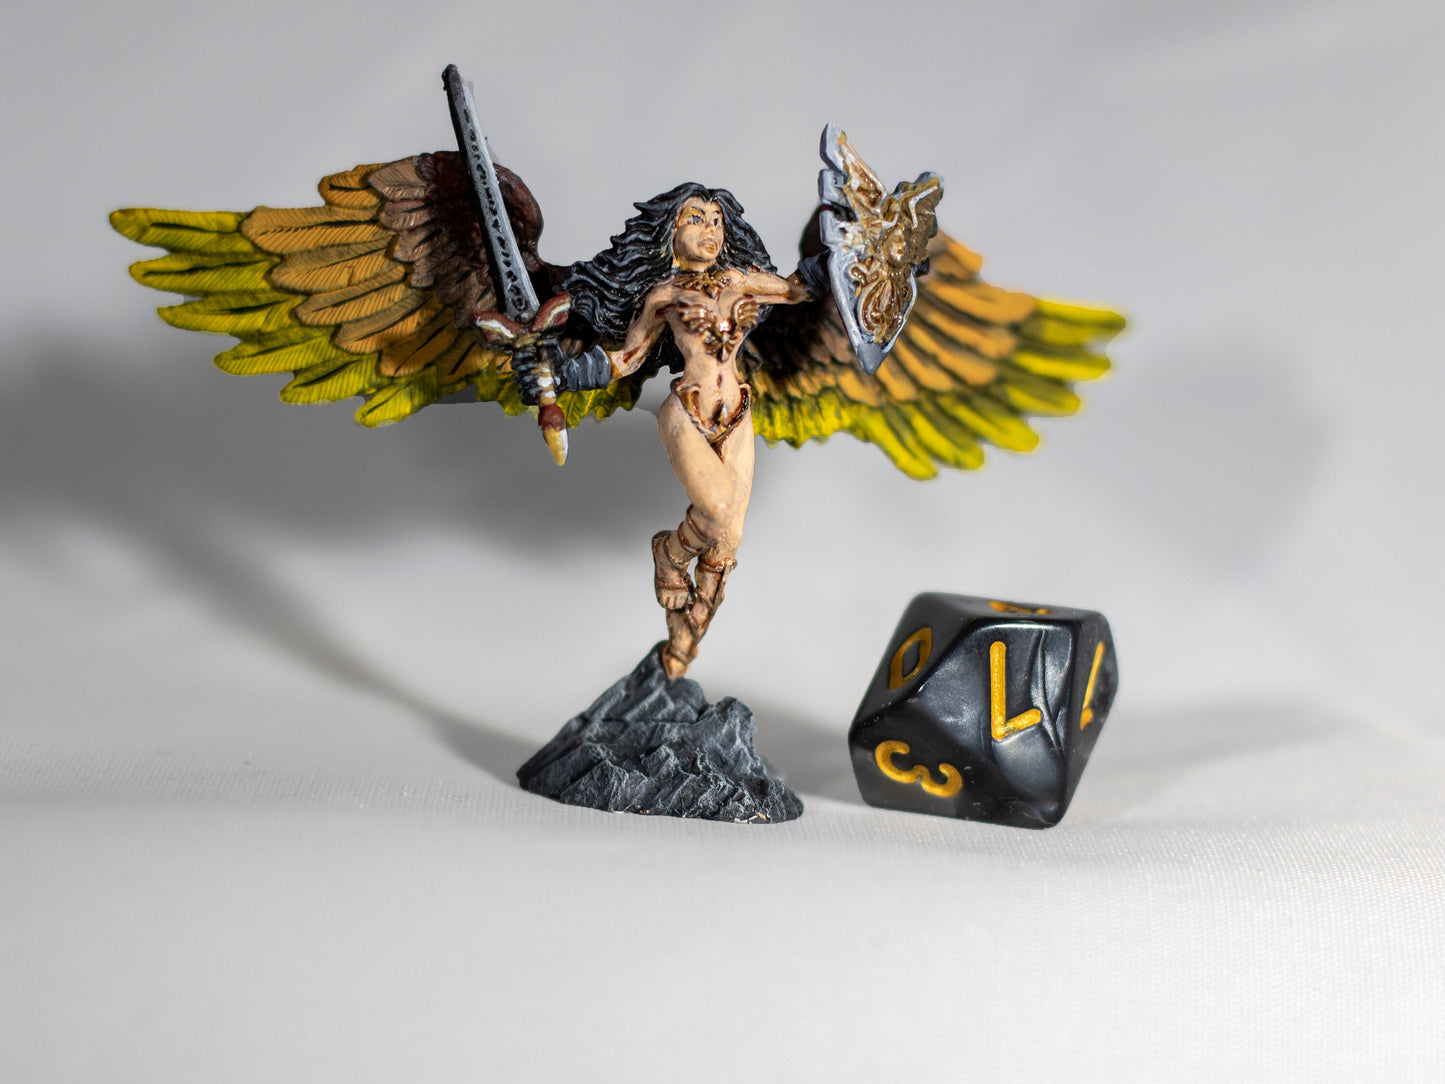 Angel of Radiance - Dungeons & Dragons Painted Miniature | Pathfinder | Tabletop